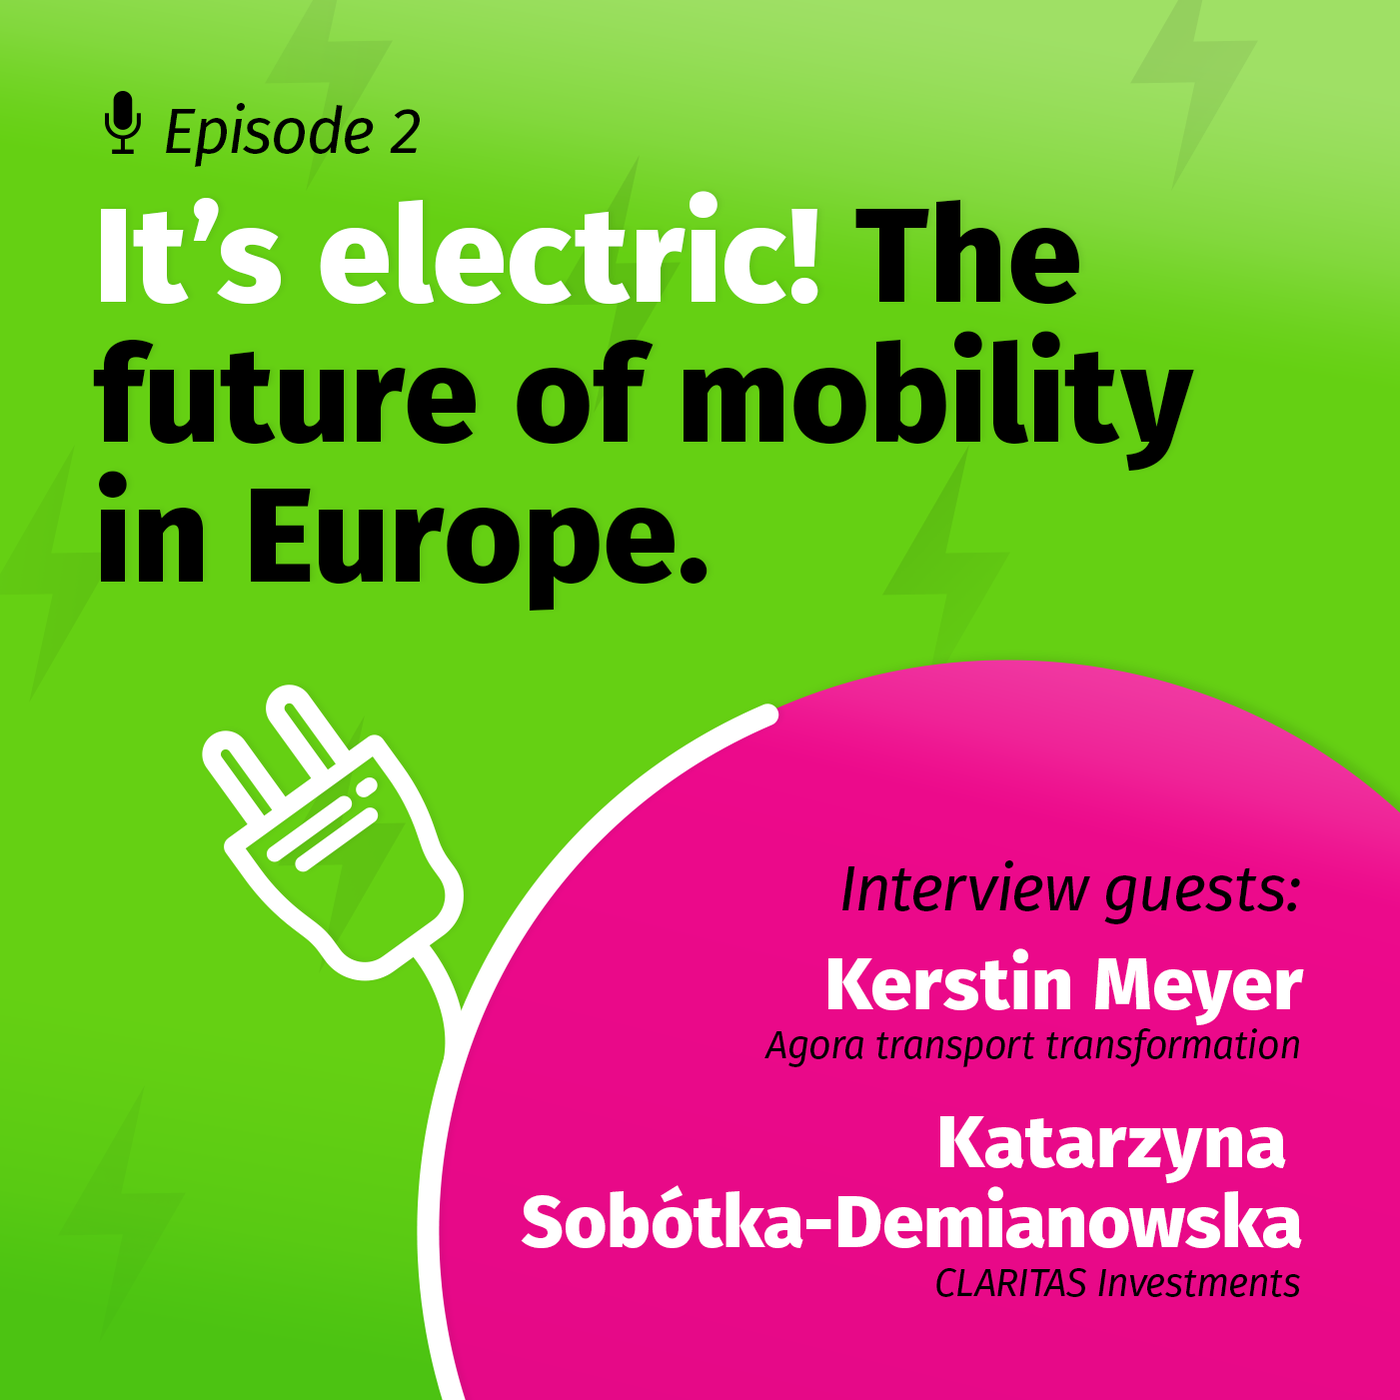 It’s electric! The future of mobility in Europe.